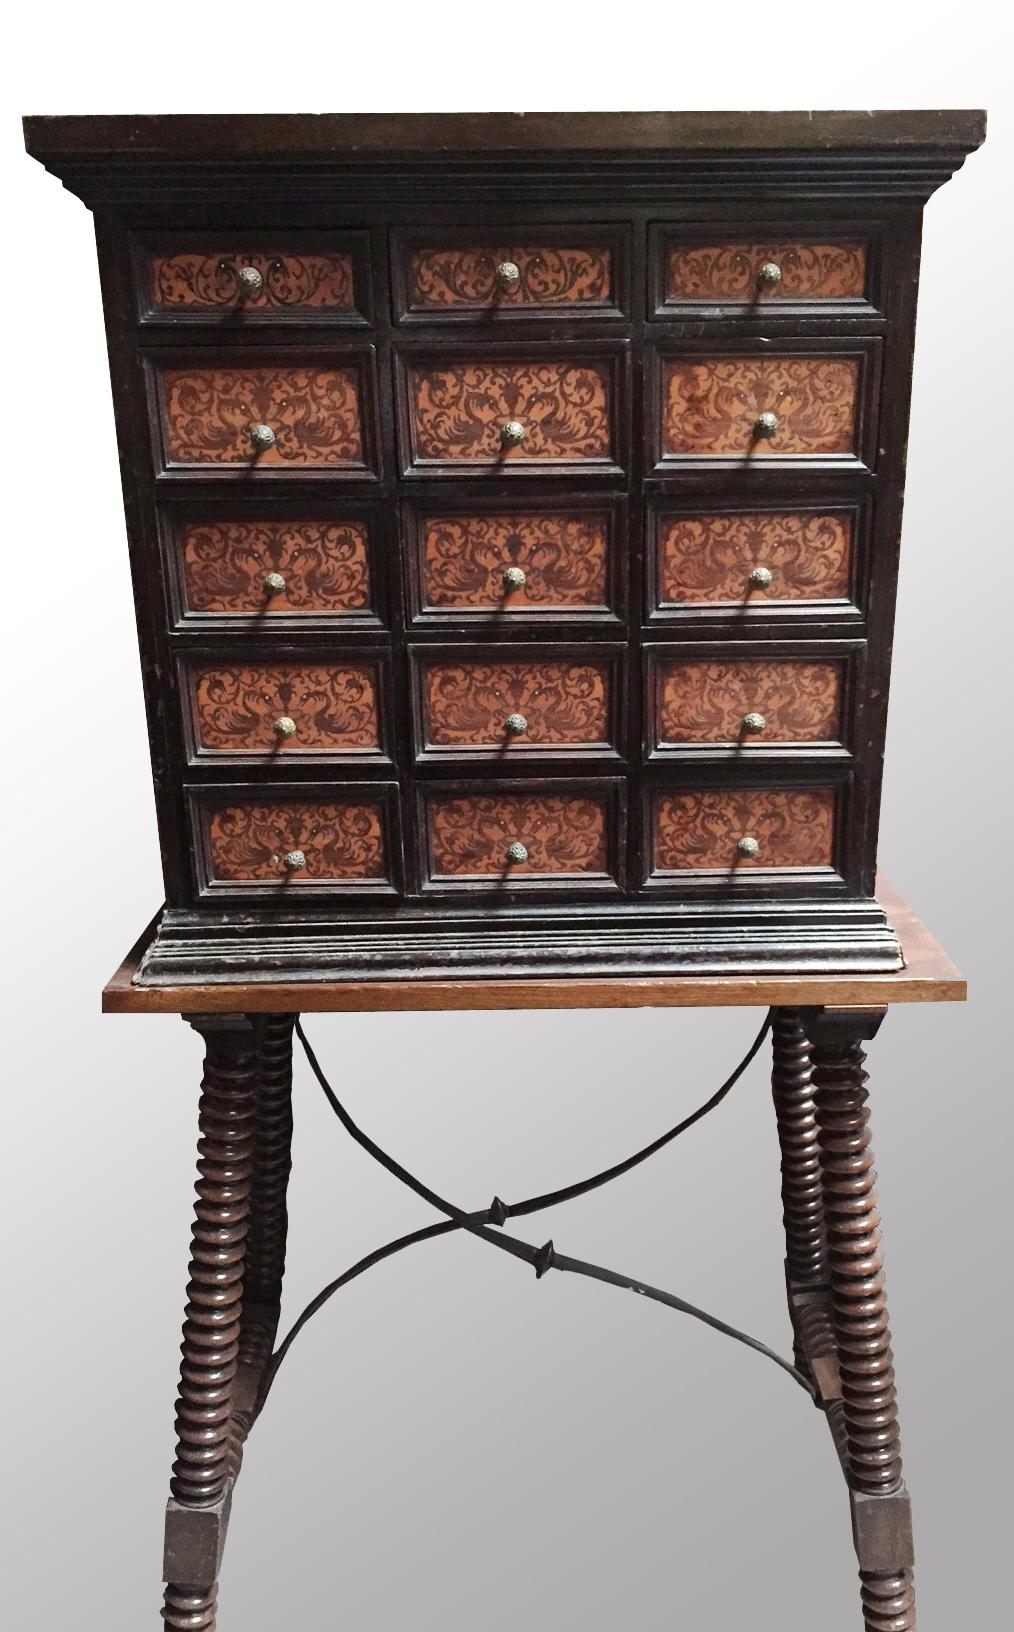 Beautiful 18th century Spanish Baroque seaweed inlaid Vargueno cabinet on later 19th century stand.
The moulded pediment is over fifteen fitted drawers, three small and twelve large drawers, inlaid with seaweed in a foliage motif, raised on a